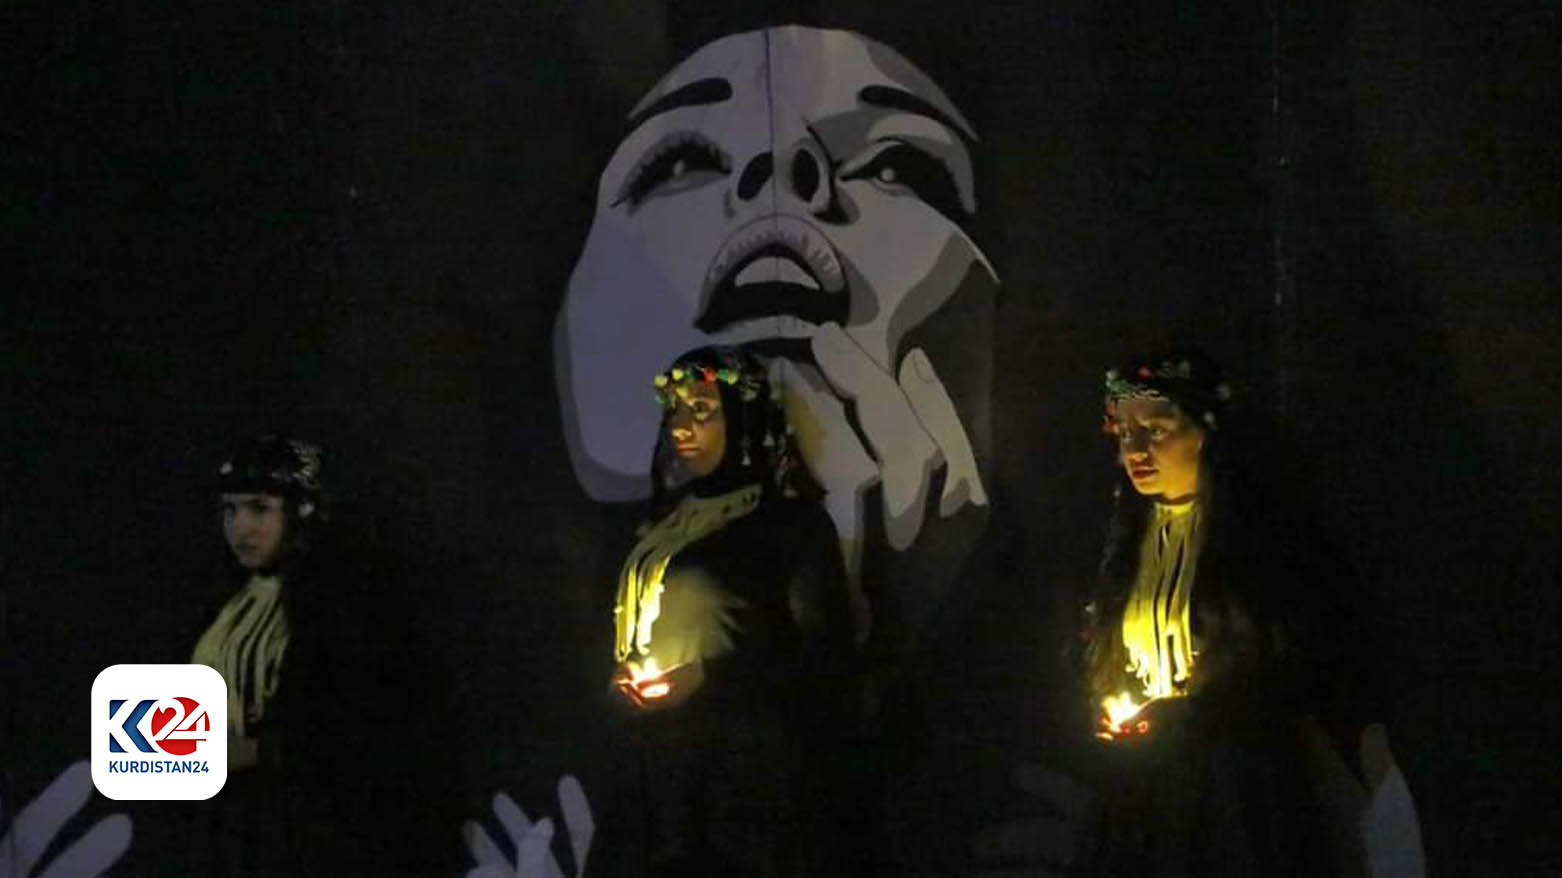 The performers at the ‘Women and Life: Inseparable Twins’ event held candles in solidarity with women's suffrage, Oct. 25, 2023 (Photo: Kurdistan 24)